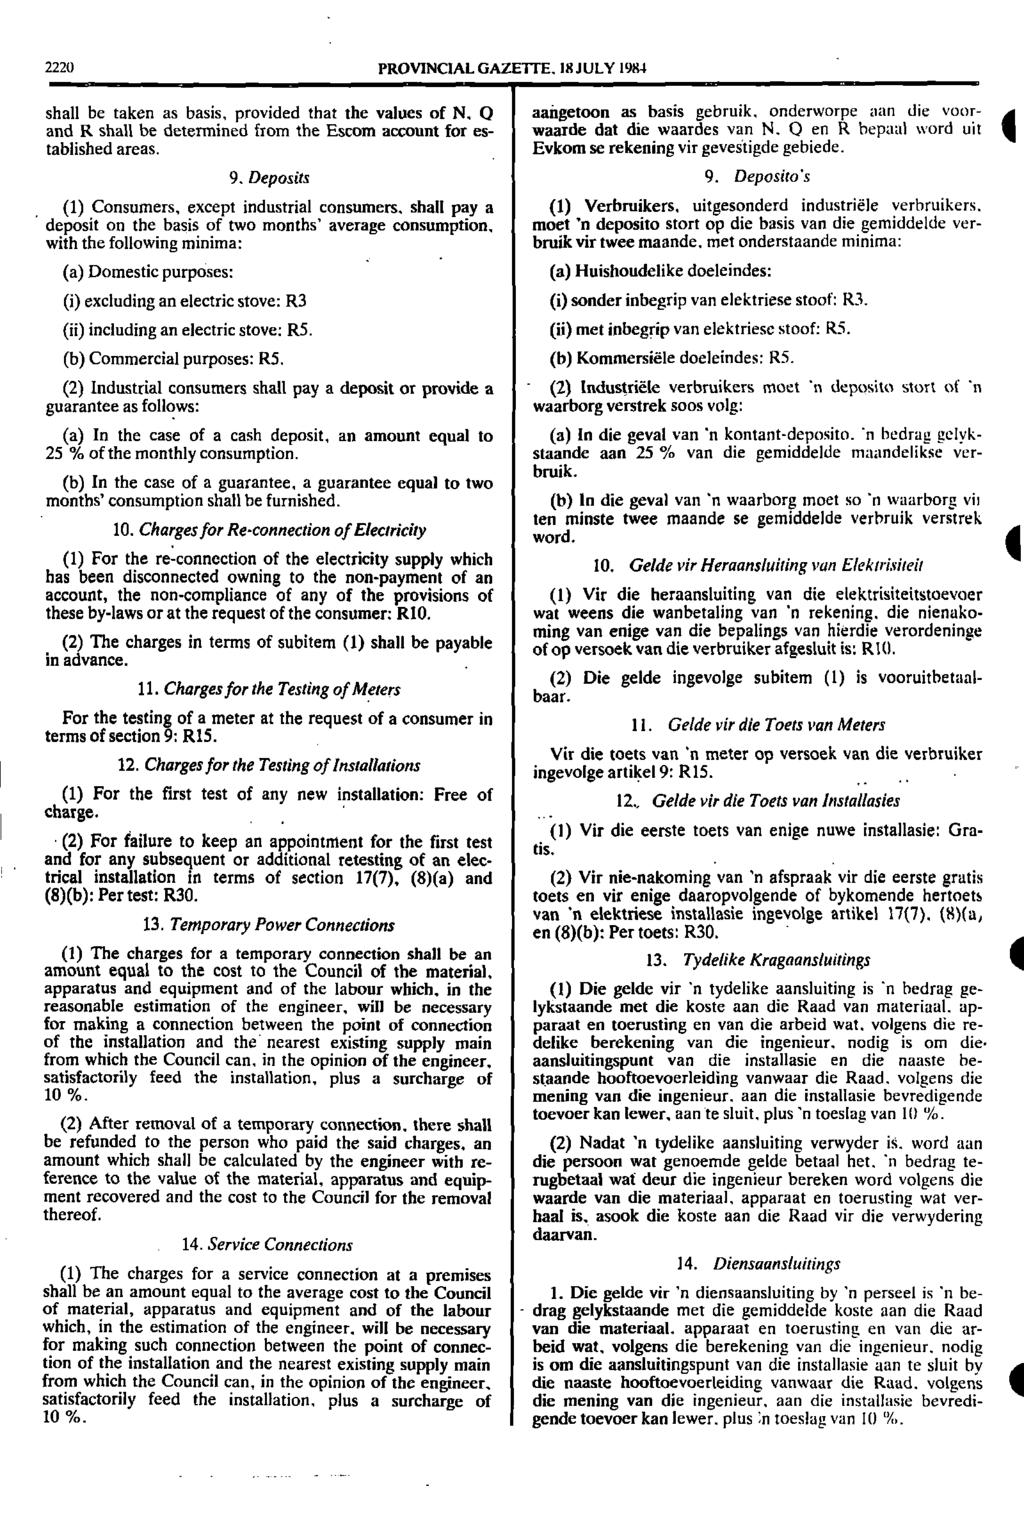 i 2220 PROVINCIAL GAZETTE. 18 JULY 1984... shall be taken as basis, provided that the values of N.